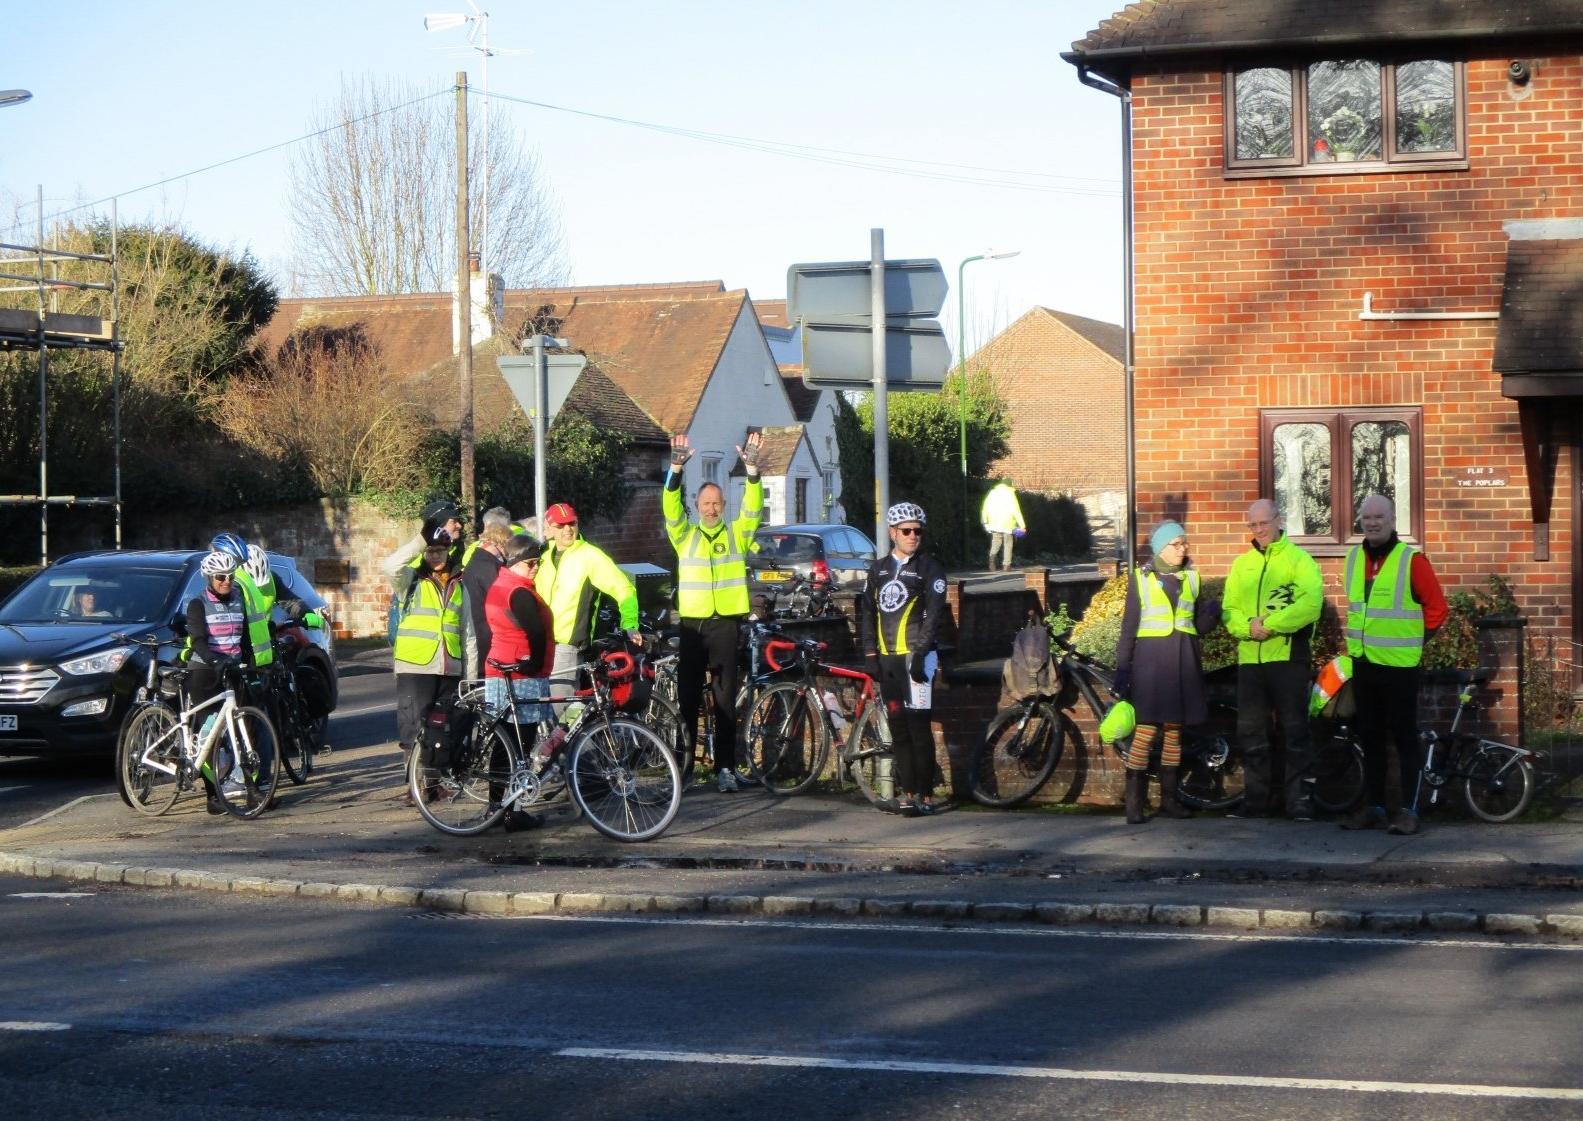 Following the death of well-known Bosham cyclist Gina McWilliam, a group of campaigners paid their respects and appealed for changes to the ‘inadequate’ road system at a well-attended event on Sunday. SUS-200122-104627001